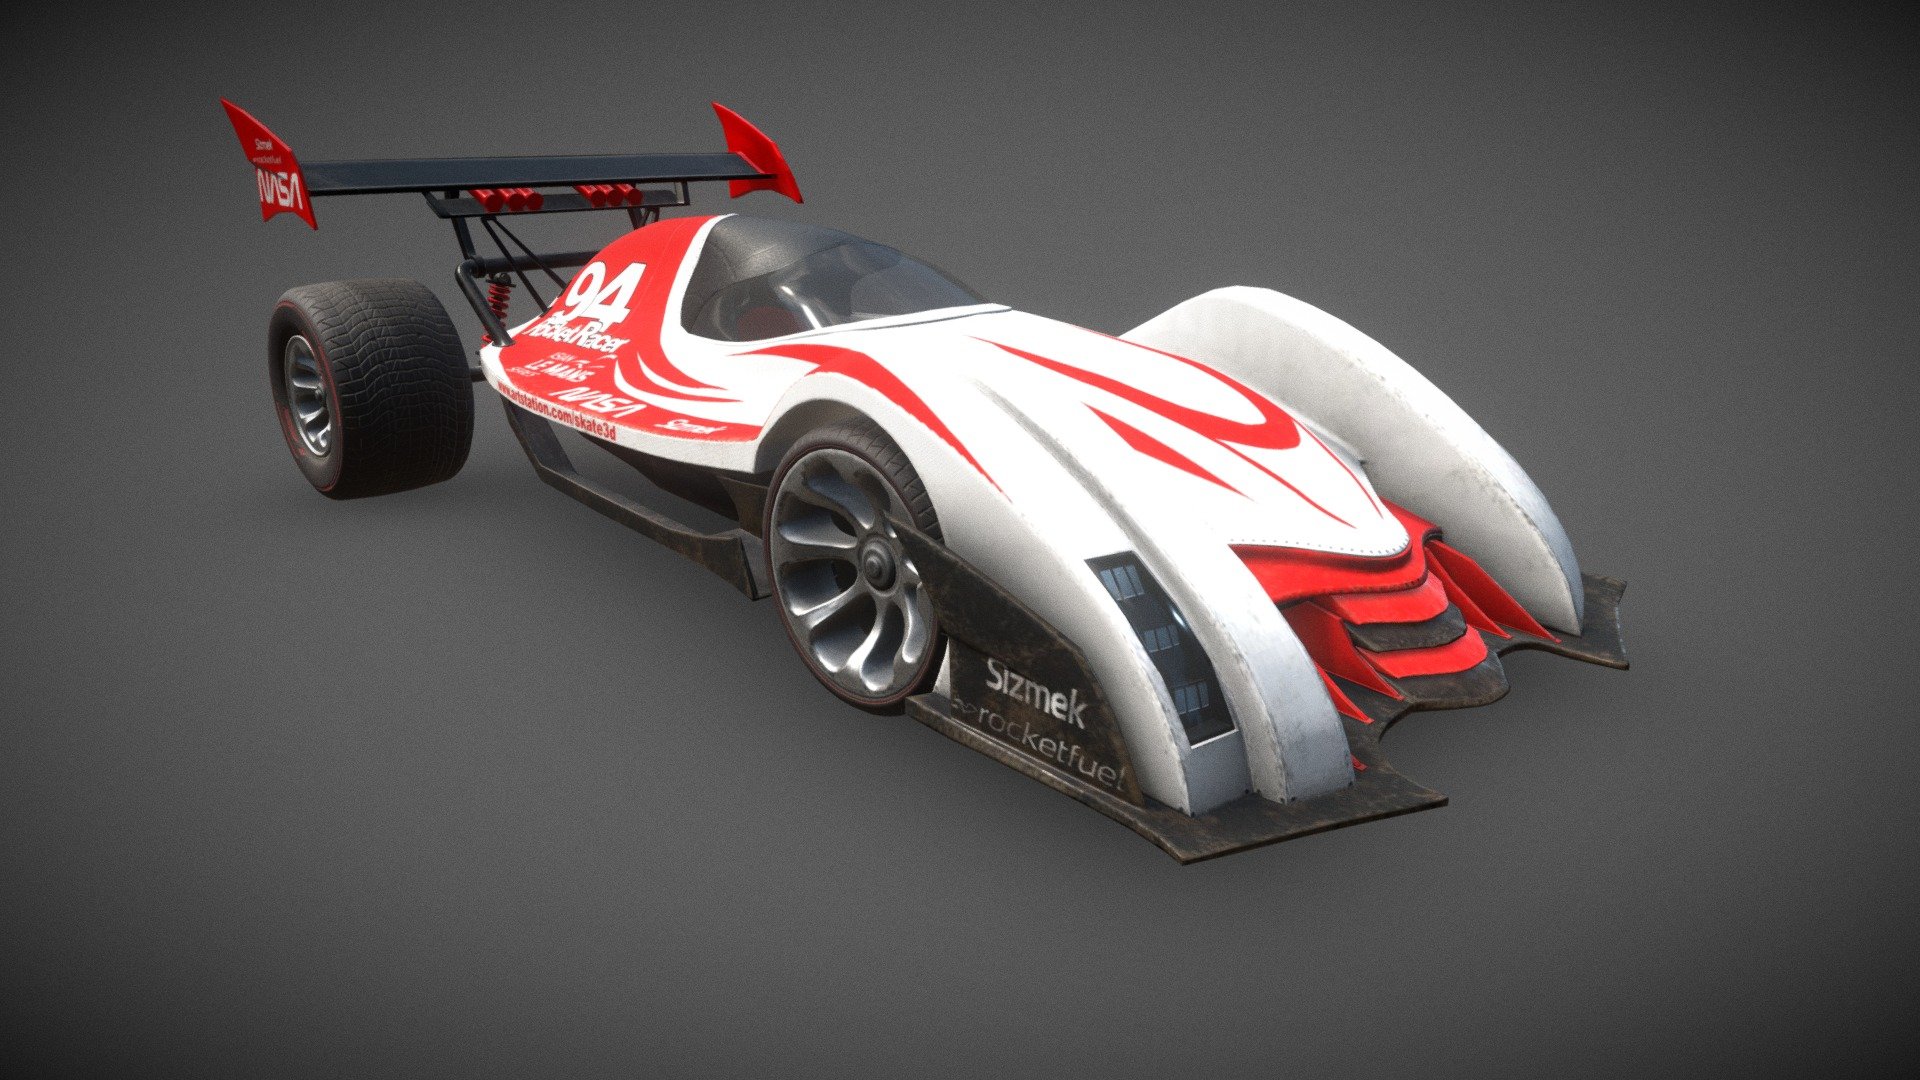 Rocket Racer, designed and modelled for my Mechanical Asset project at Teesside University. We were tasked to build a vehicle or weapon that would fit in the Wacky Races universe, my inspirations were F1 and LMP2 racing cars, and rocket/jet engines! - Rocket Racer - 3D model by skate3d 3d model